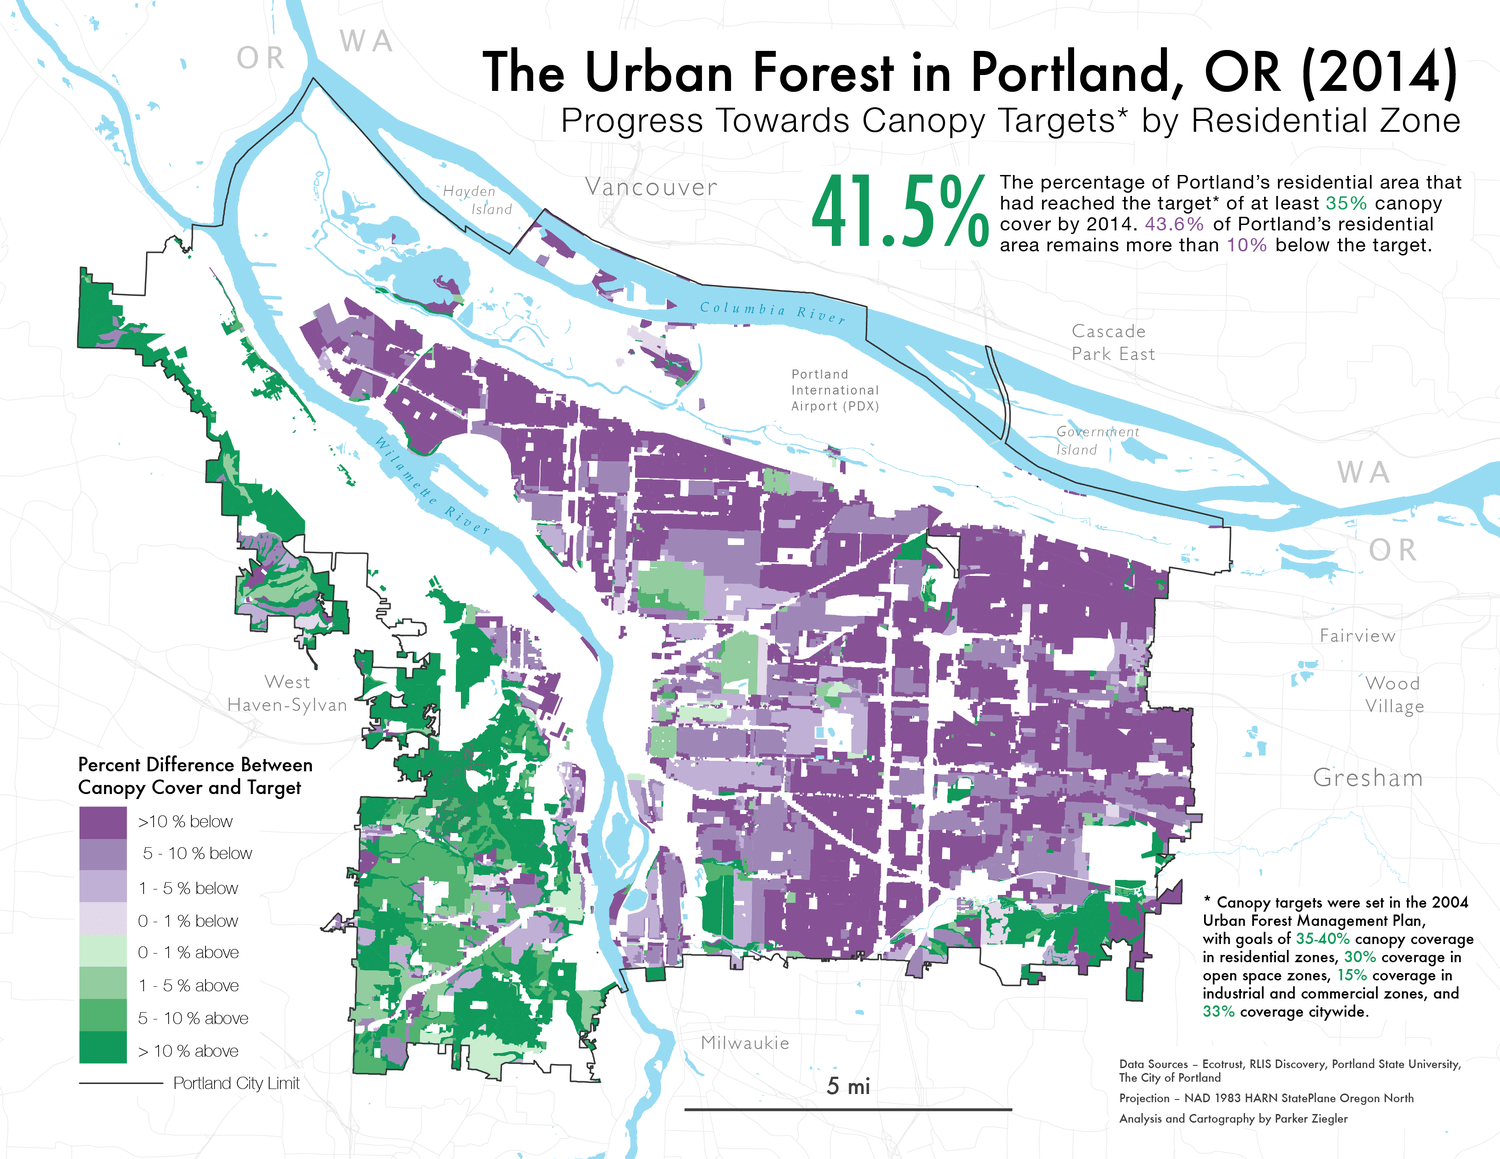 A map of Portland's urban canopy cover compared to city targets by Residential Zone in 2014.